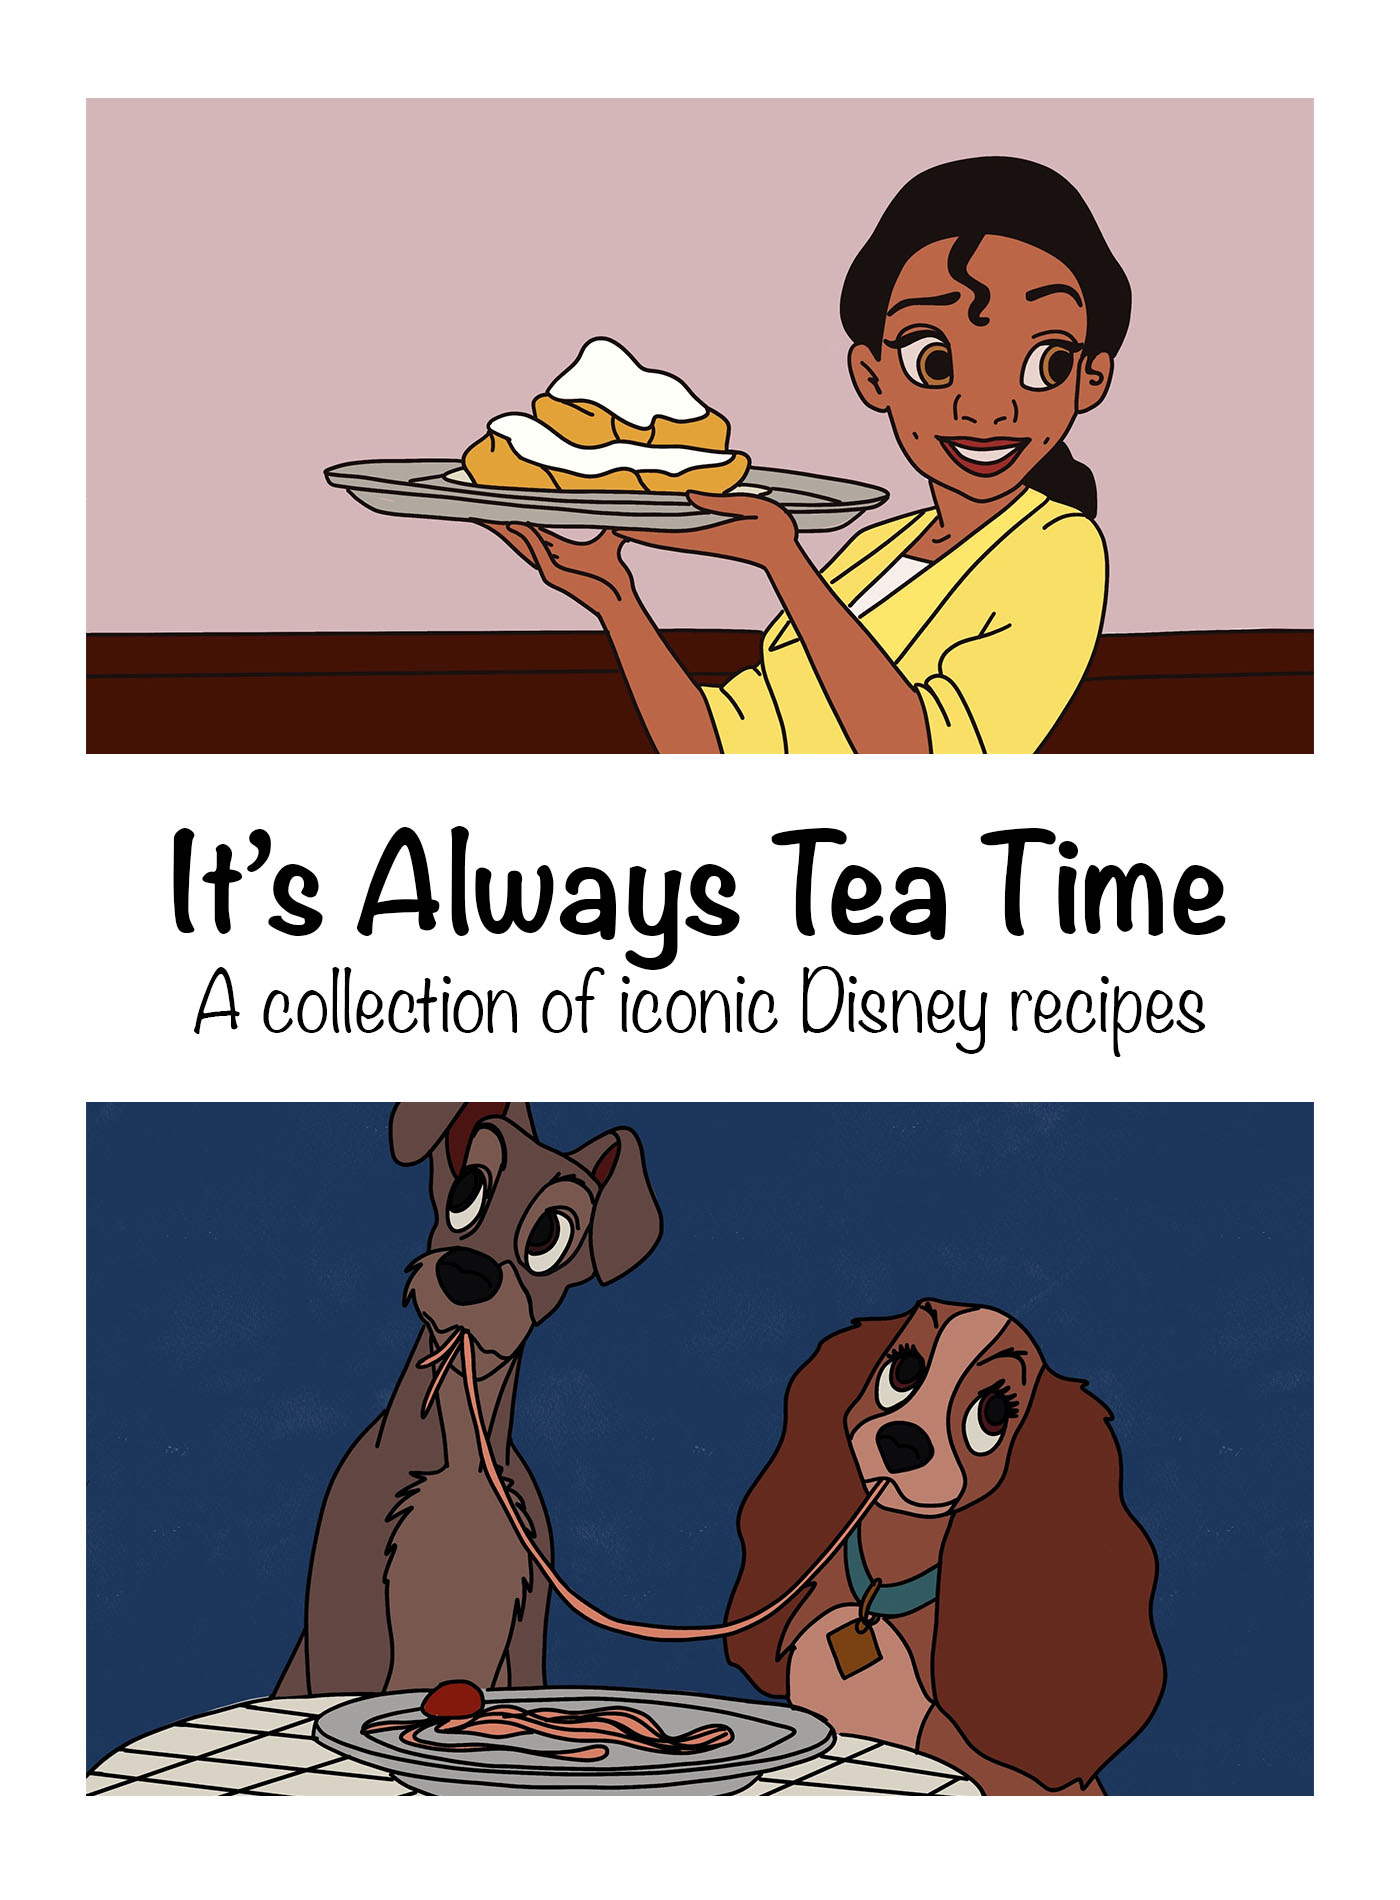 This is an image of the cover of my recipe book. It contains two cartoon style illustrations, both feature food. The tile It's Always Tea Time is featured in the centre of the image